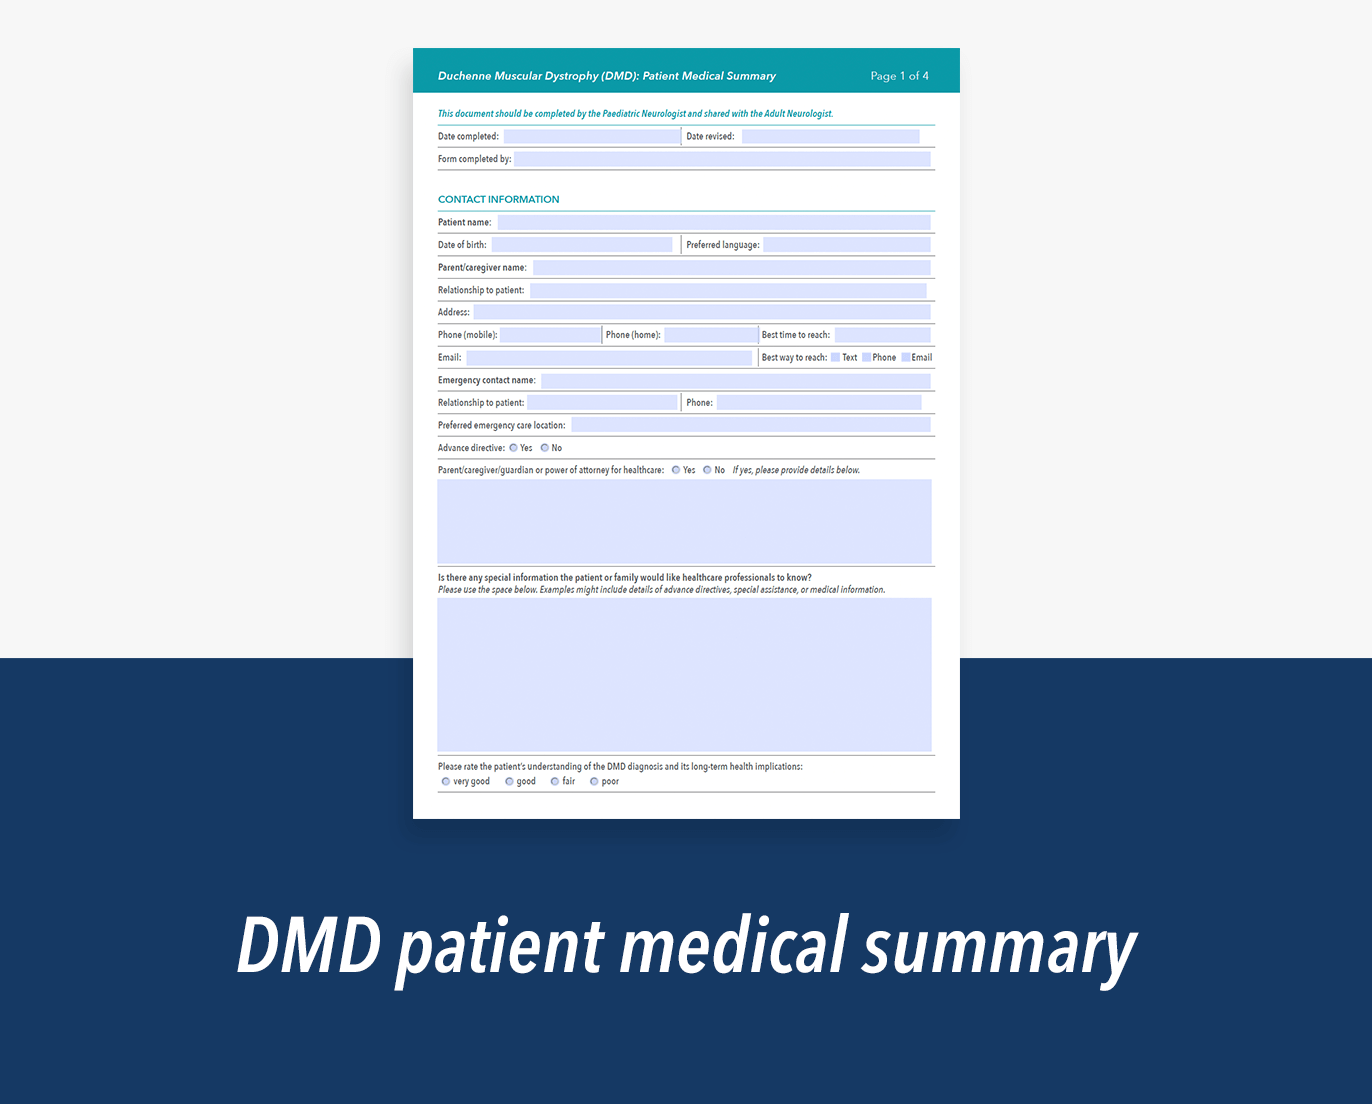 Image showing the front cover of the patient medical summary booklet